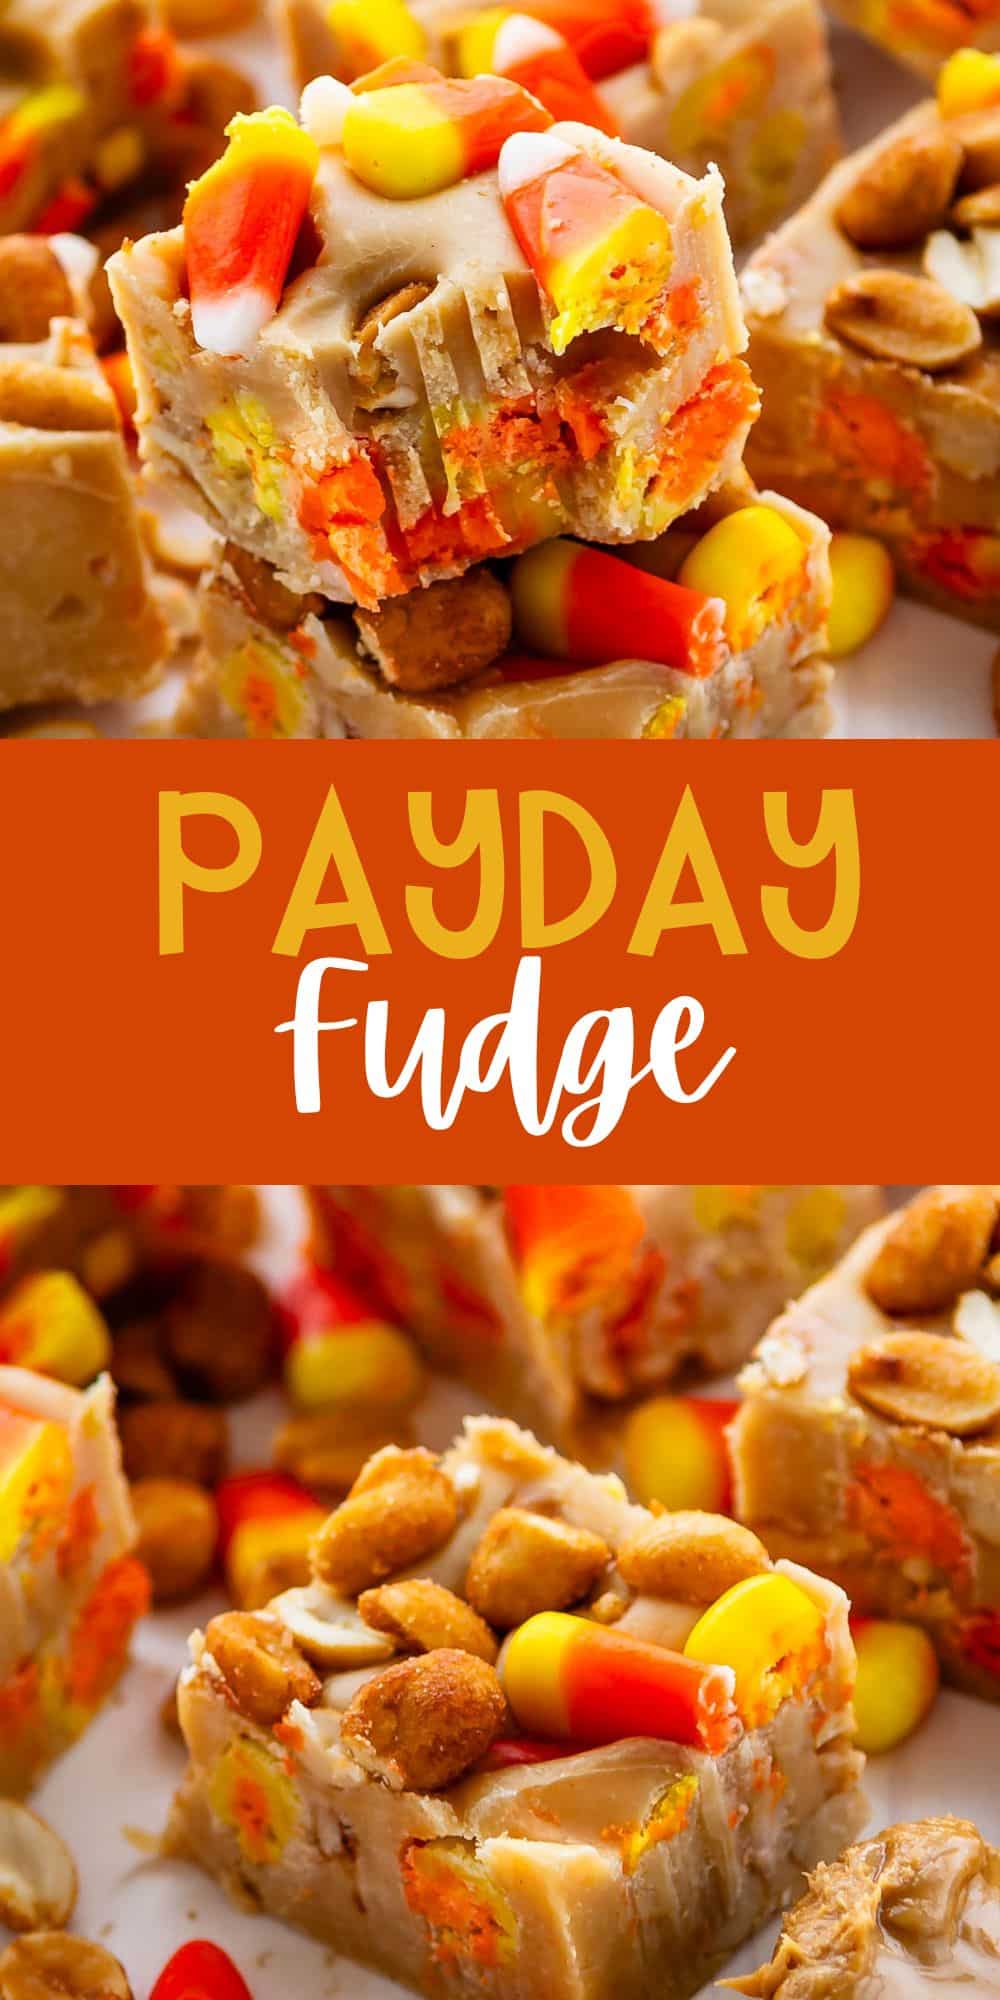 two photos of stacked fudge with candy corn baked in with words on the image.